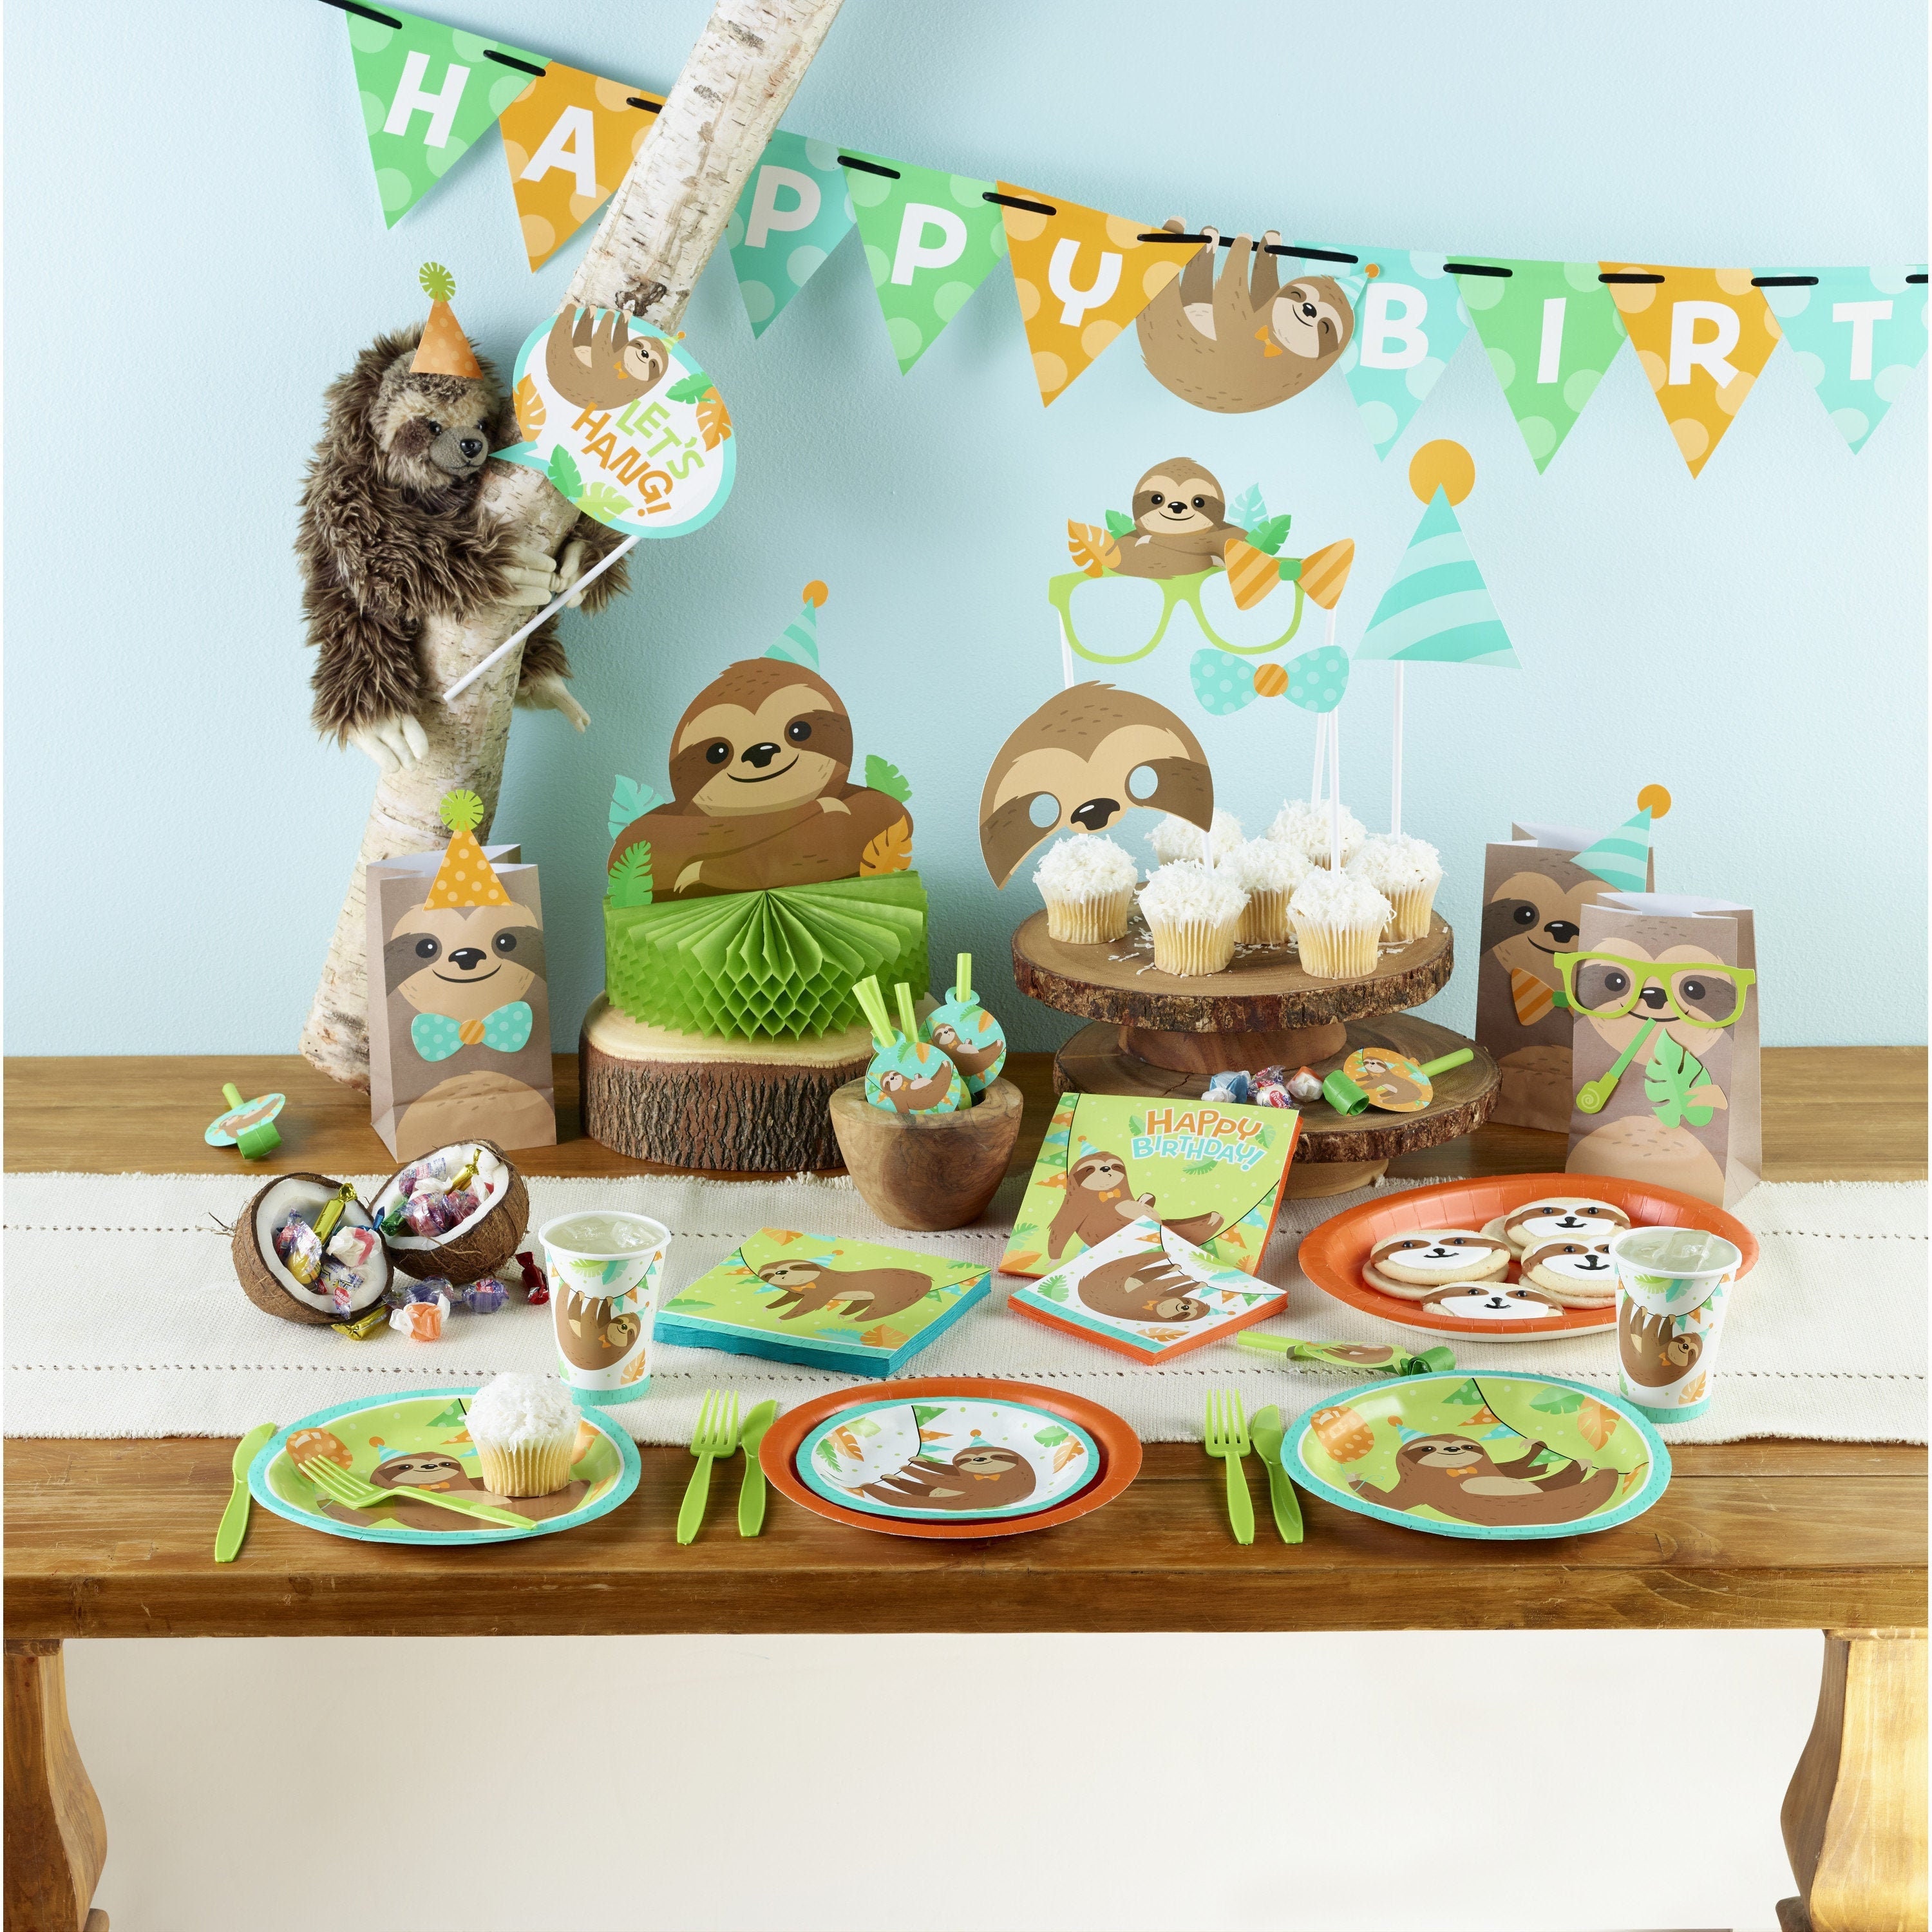 2 PERSONALISED Sloth 3rd Birthday Banner X2 Party Decorations Boys Girls Kids